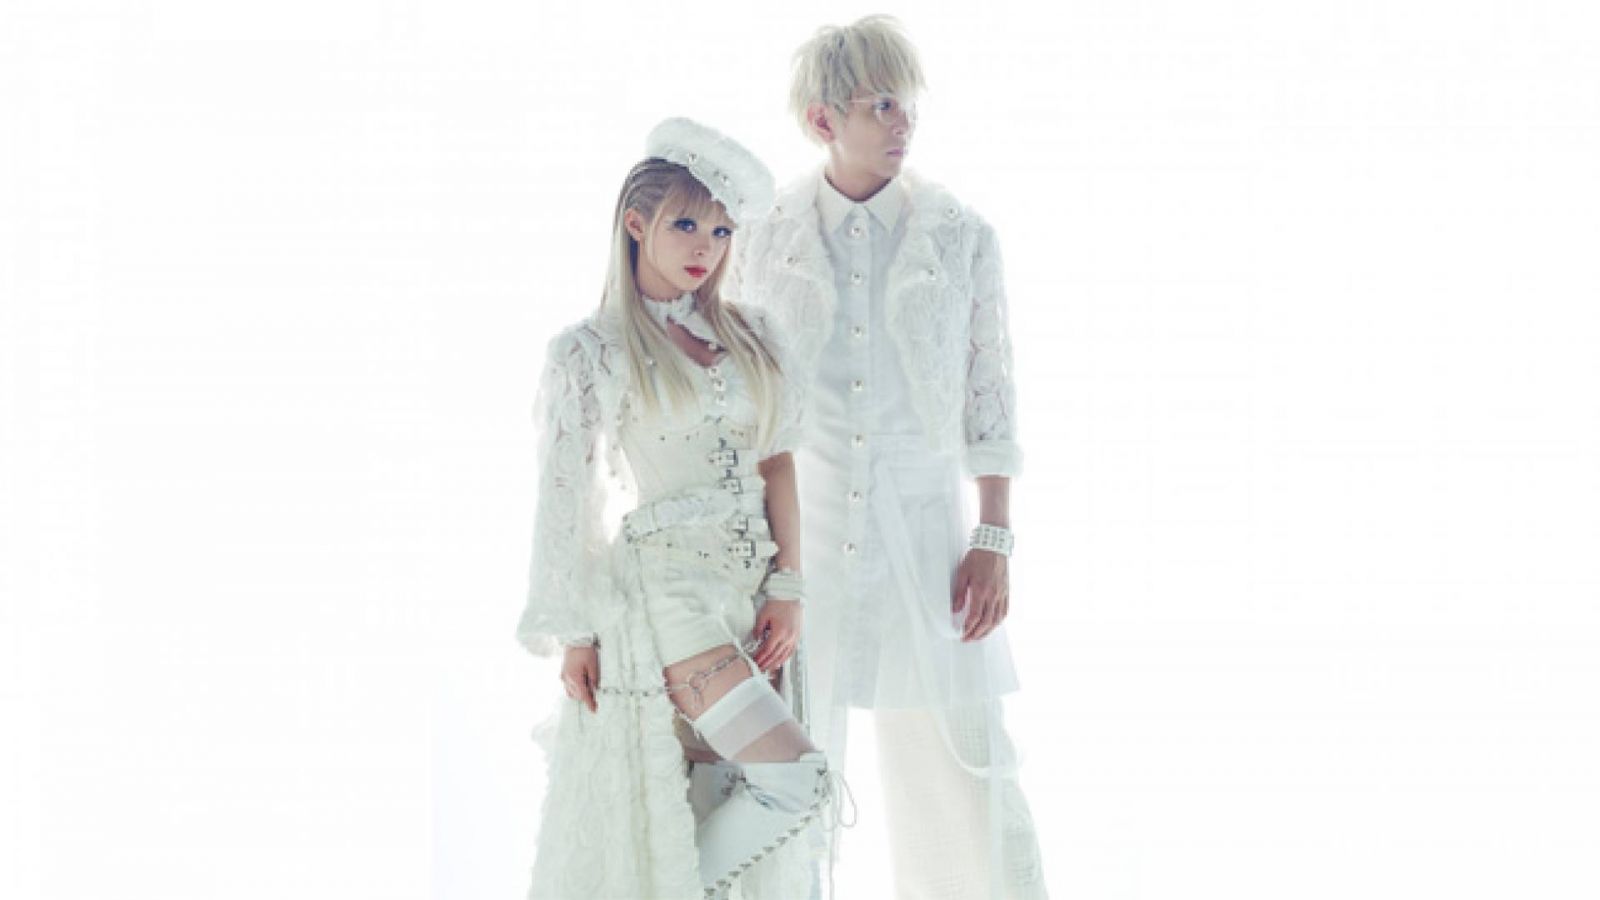 Interview with GARNiDELiA © 2017 Sony Music Entertainment (Japan) Inc. All rights reserved.